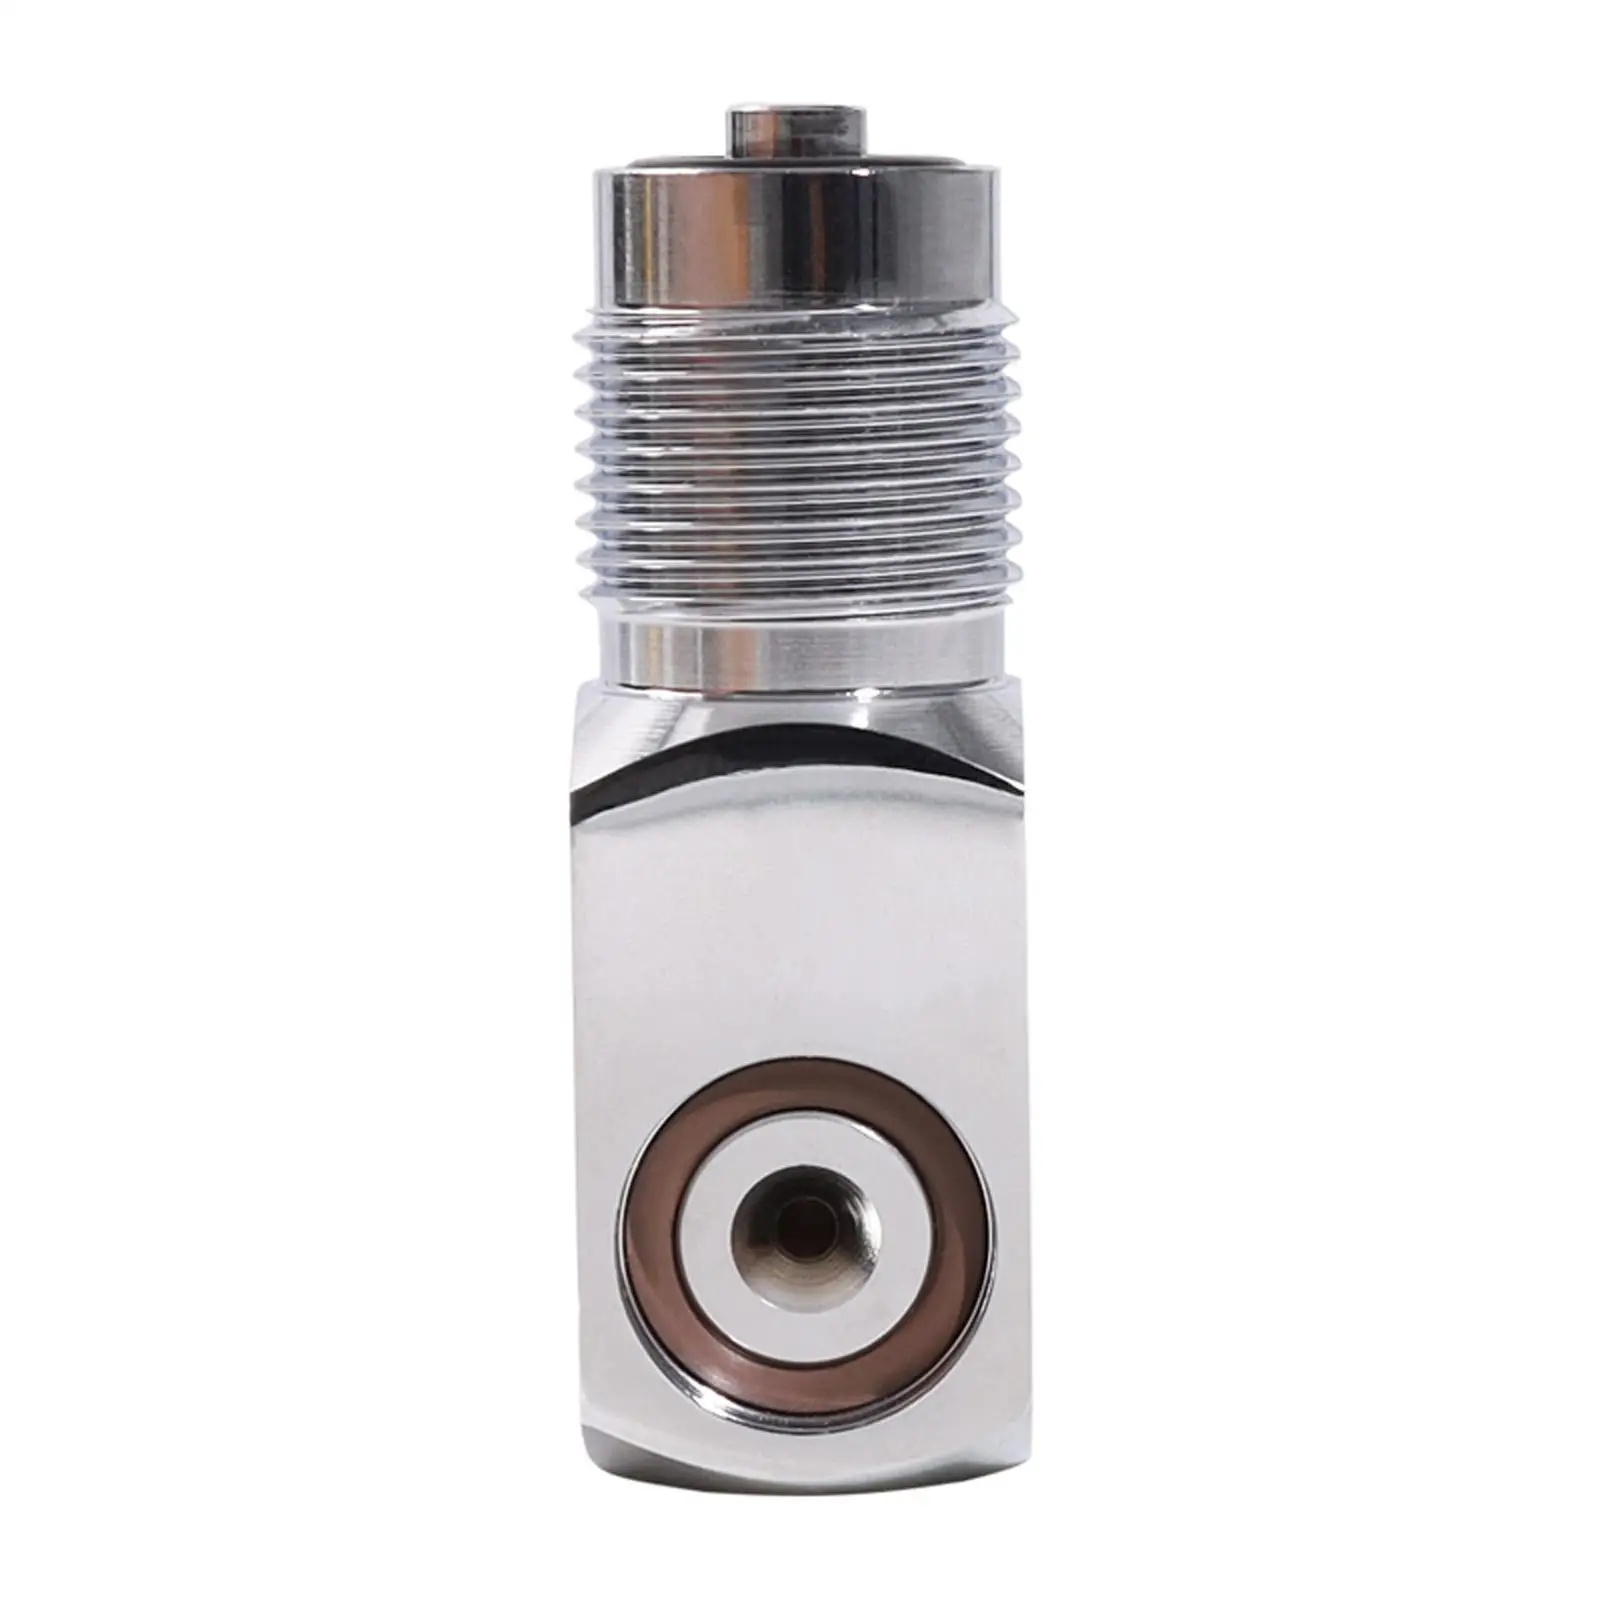 Scuba Tank Din to Yoke Filling Adapter, Scuba Diving Cylinder Adapter Valve Screw for Outdoor Water  Tool